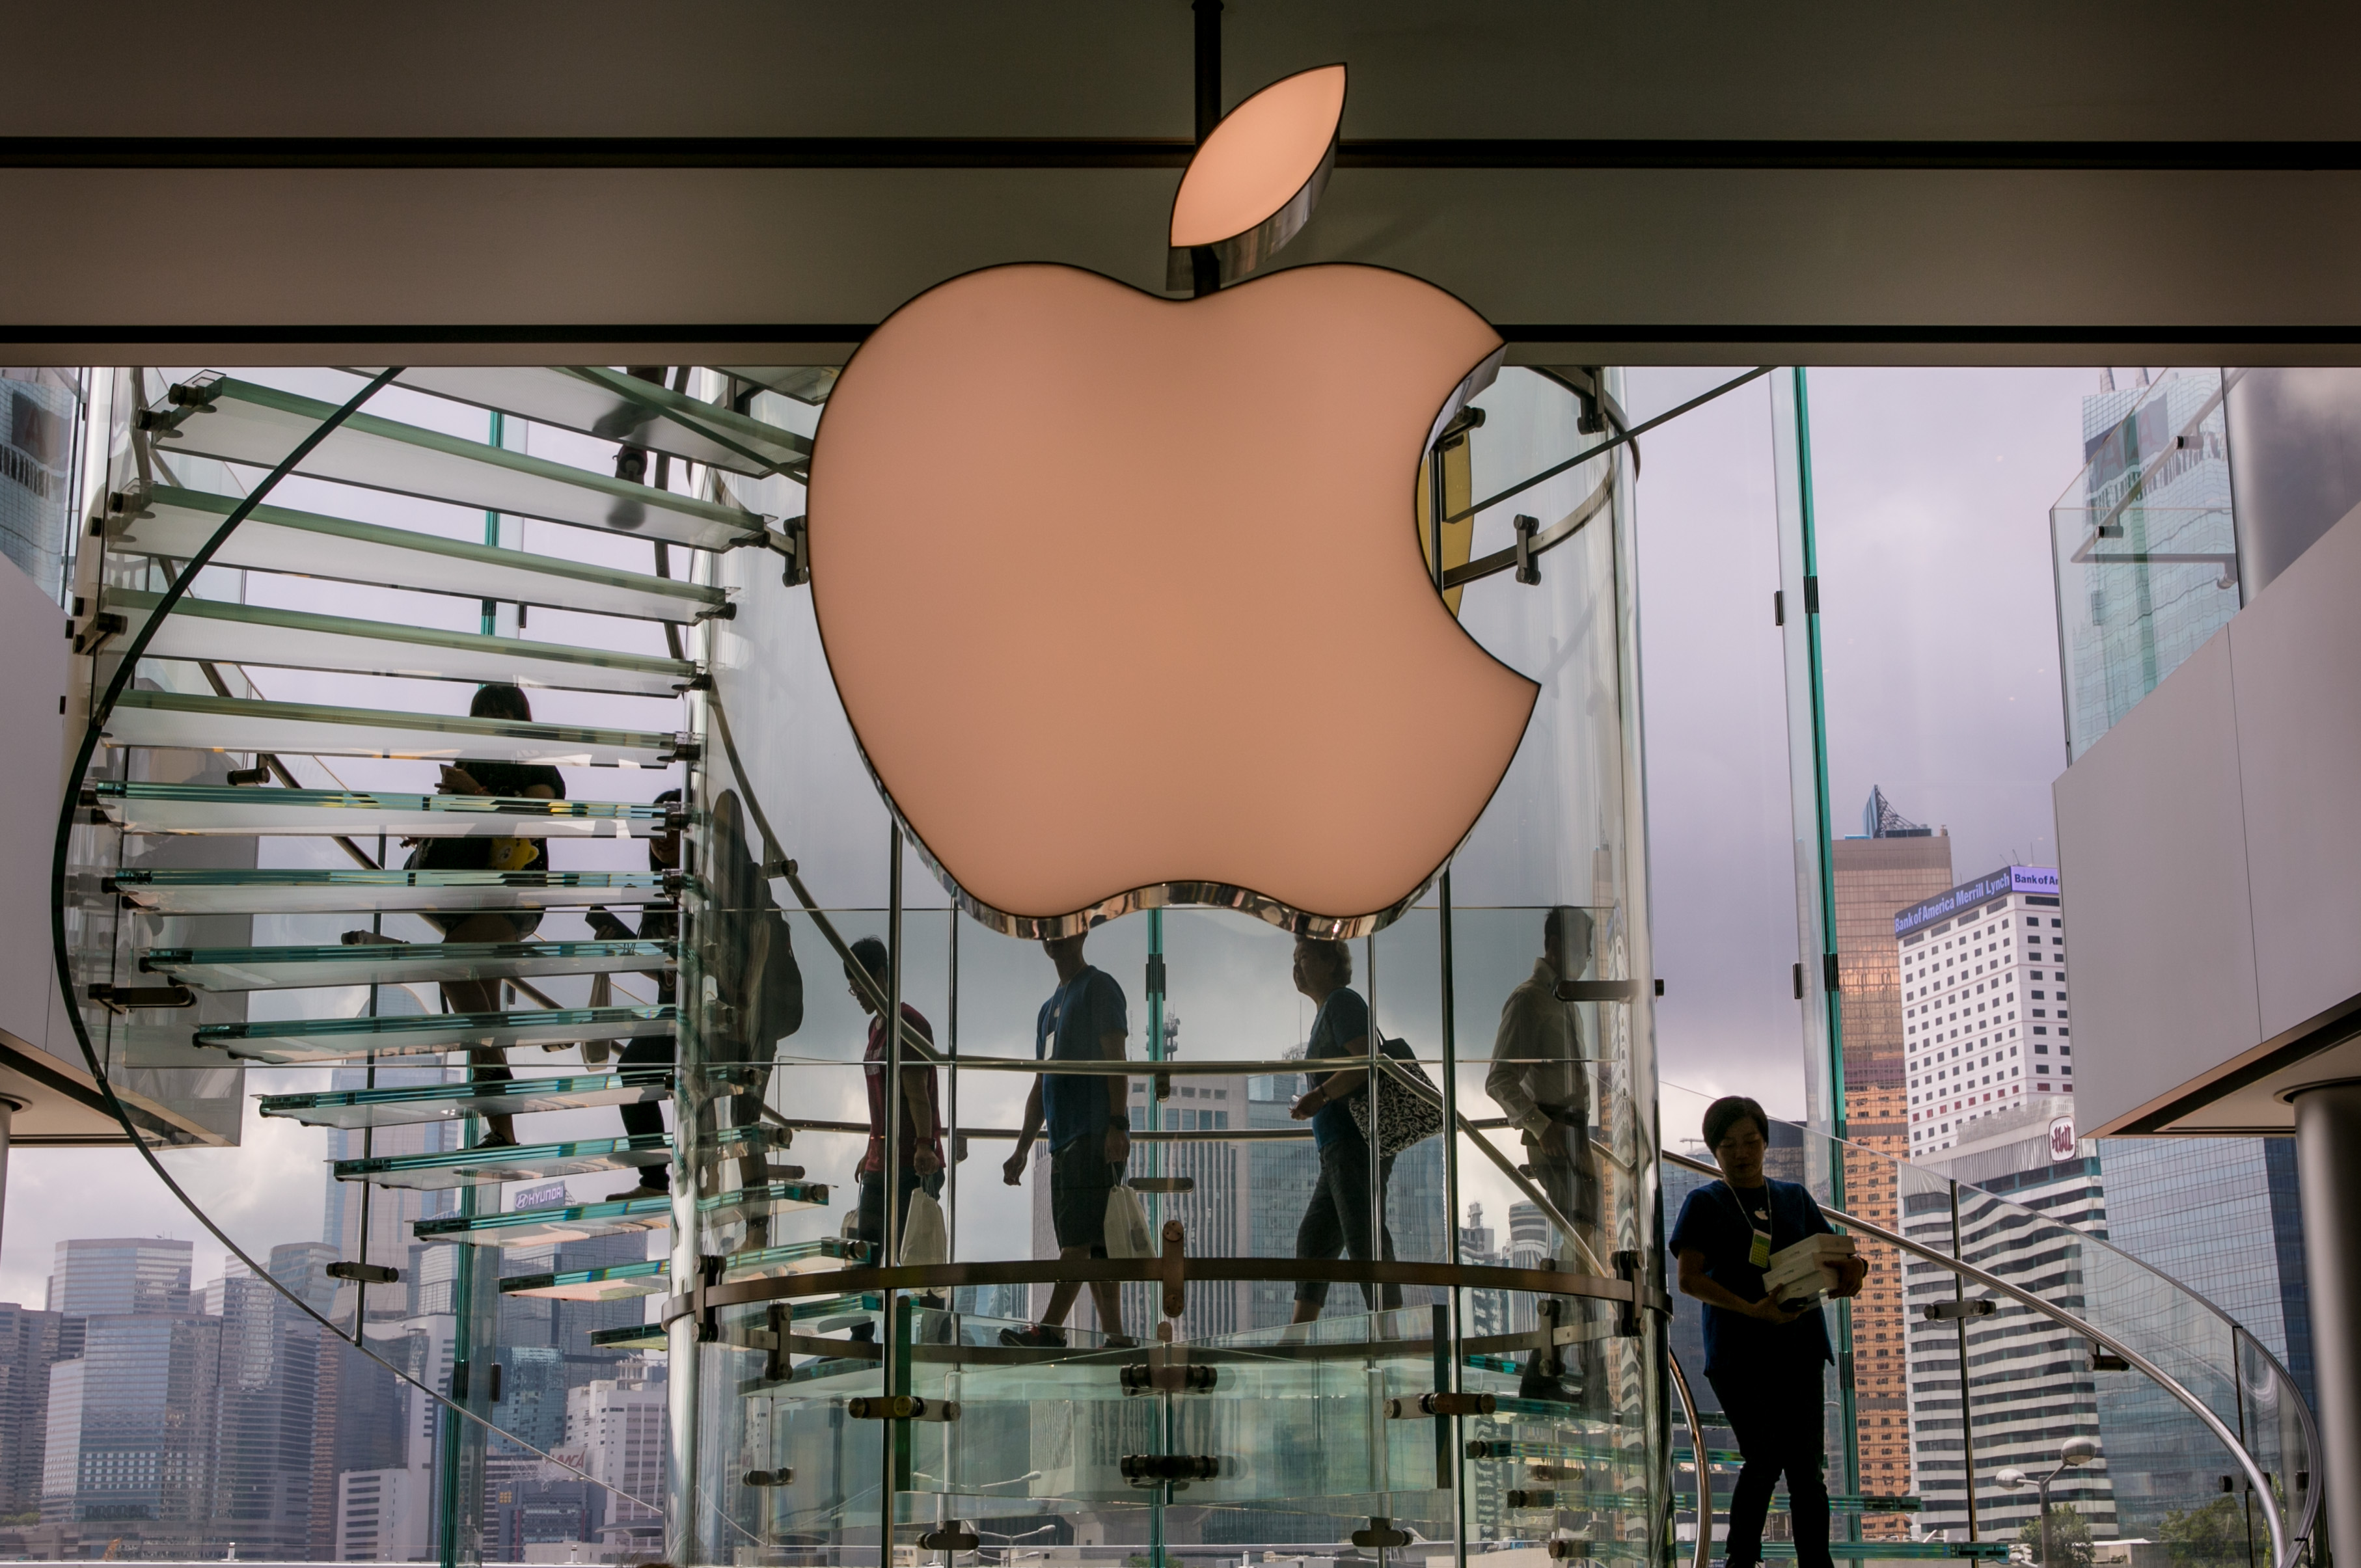 The exterior of the downtown Apple Store in Central Hong Kong in May 2014. (George Rose&mdash;Getty Images)